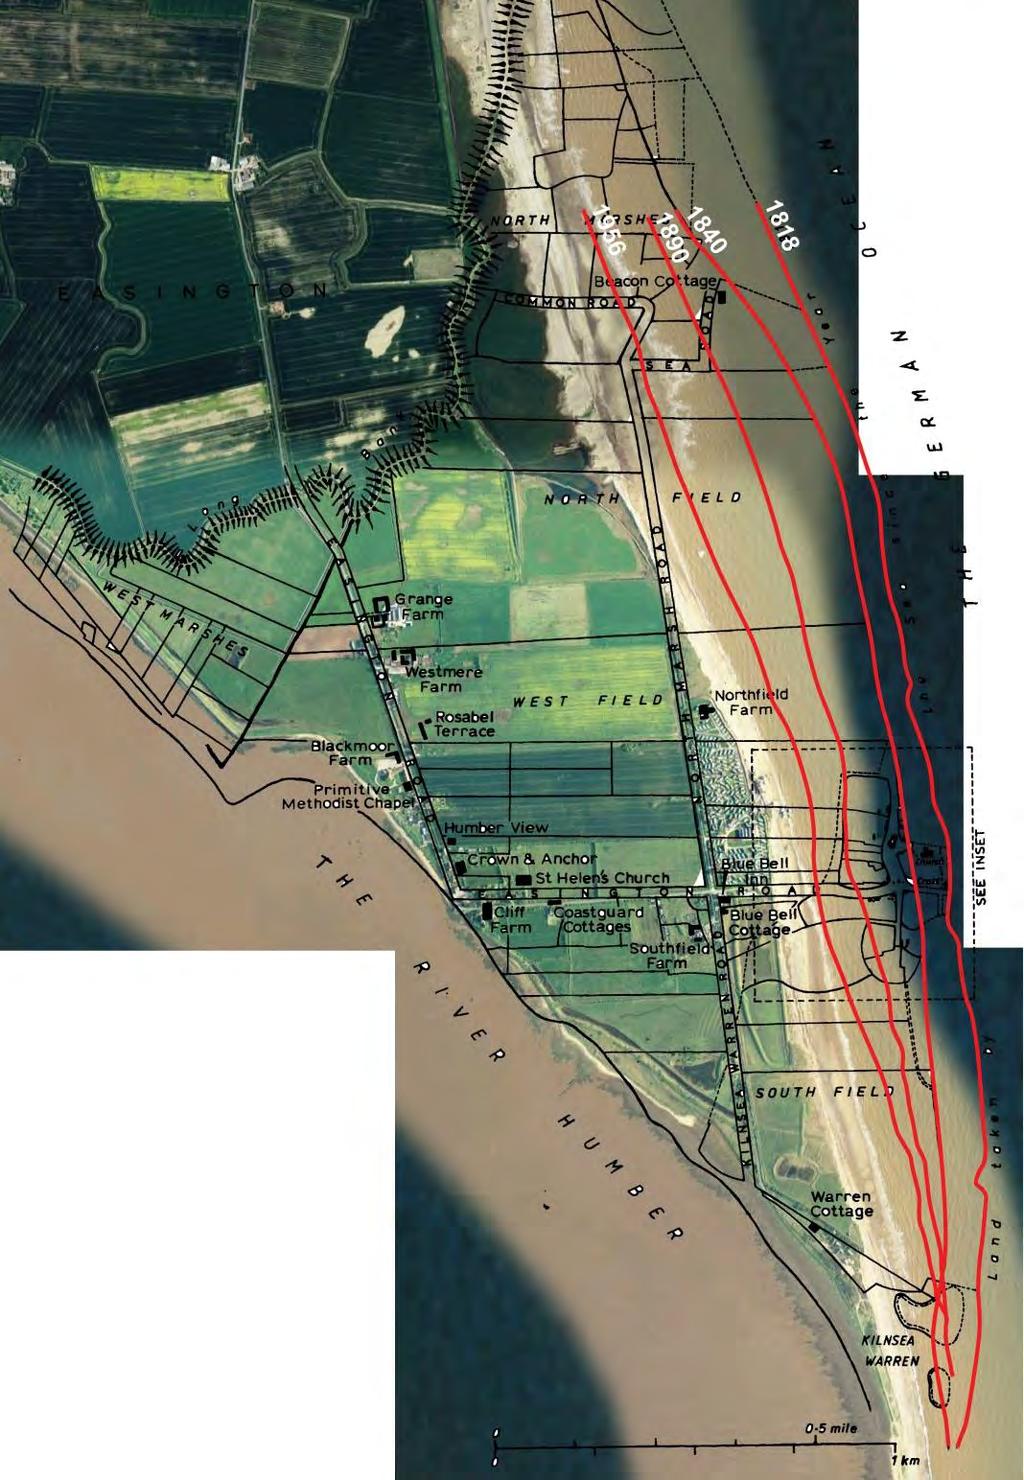 Aerial photograph of Kilnsea taken 2007, overlain with enclosure map surveyed 1818 and 1840, and